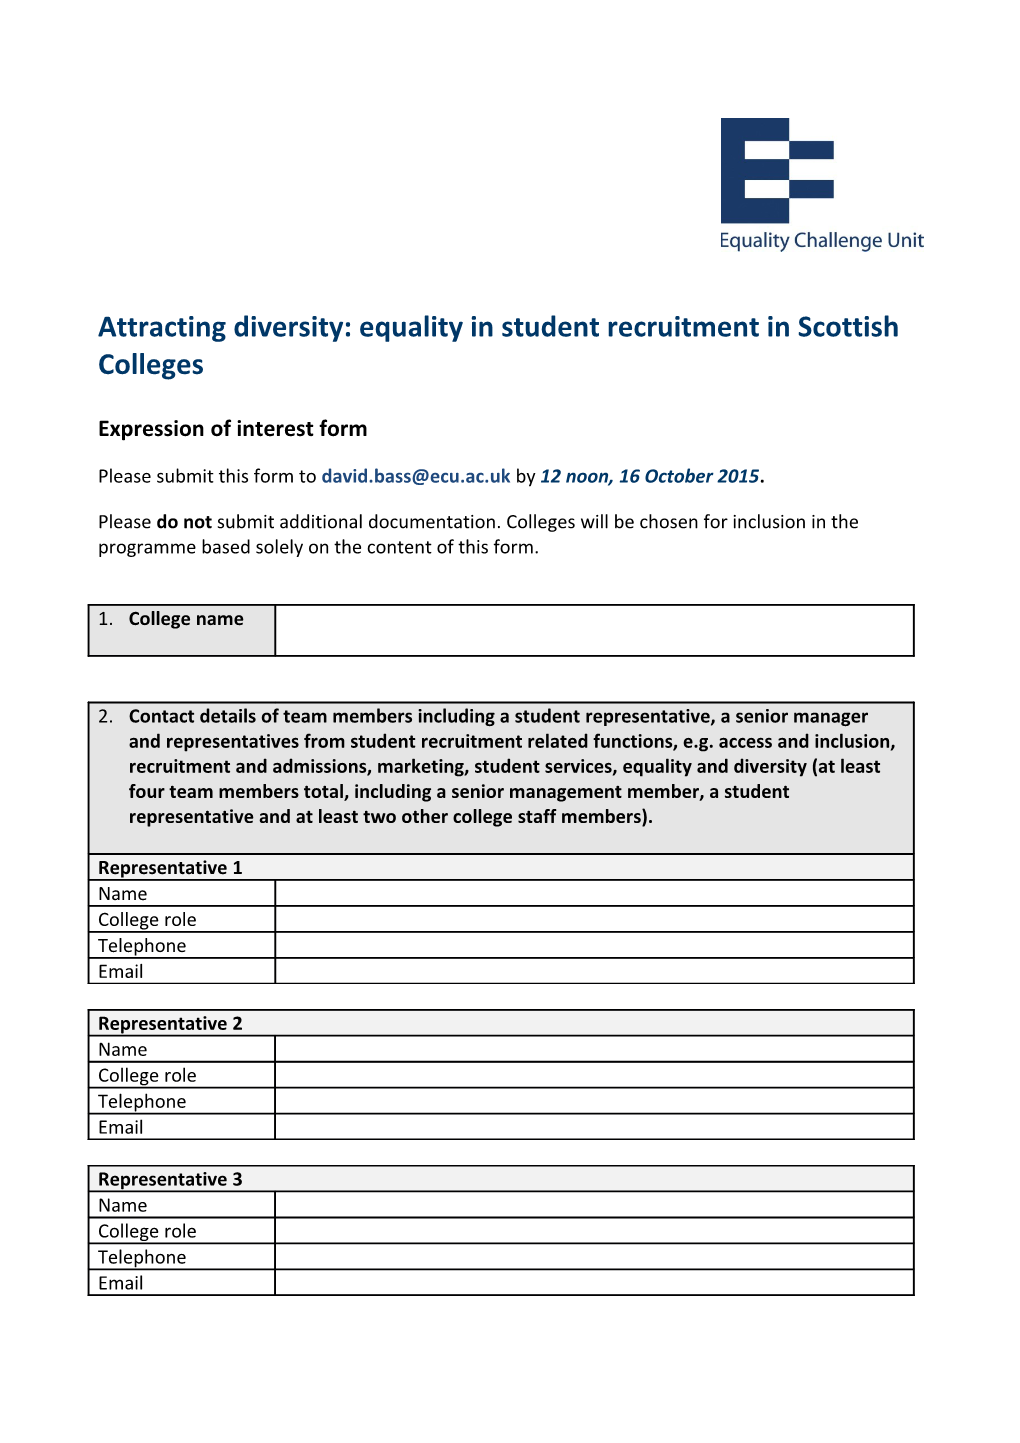 Attracting Diversity: Equality in Student Recruitment in Scottish Colleges